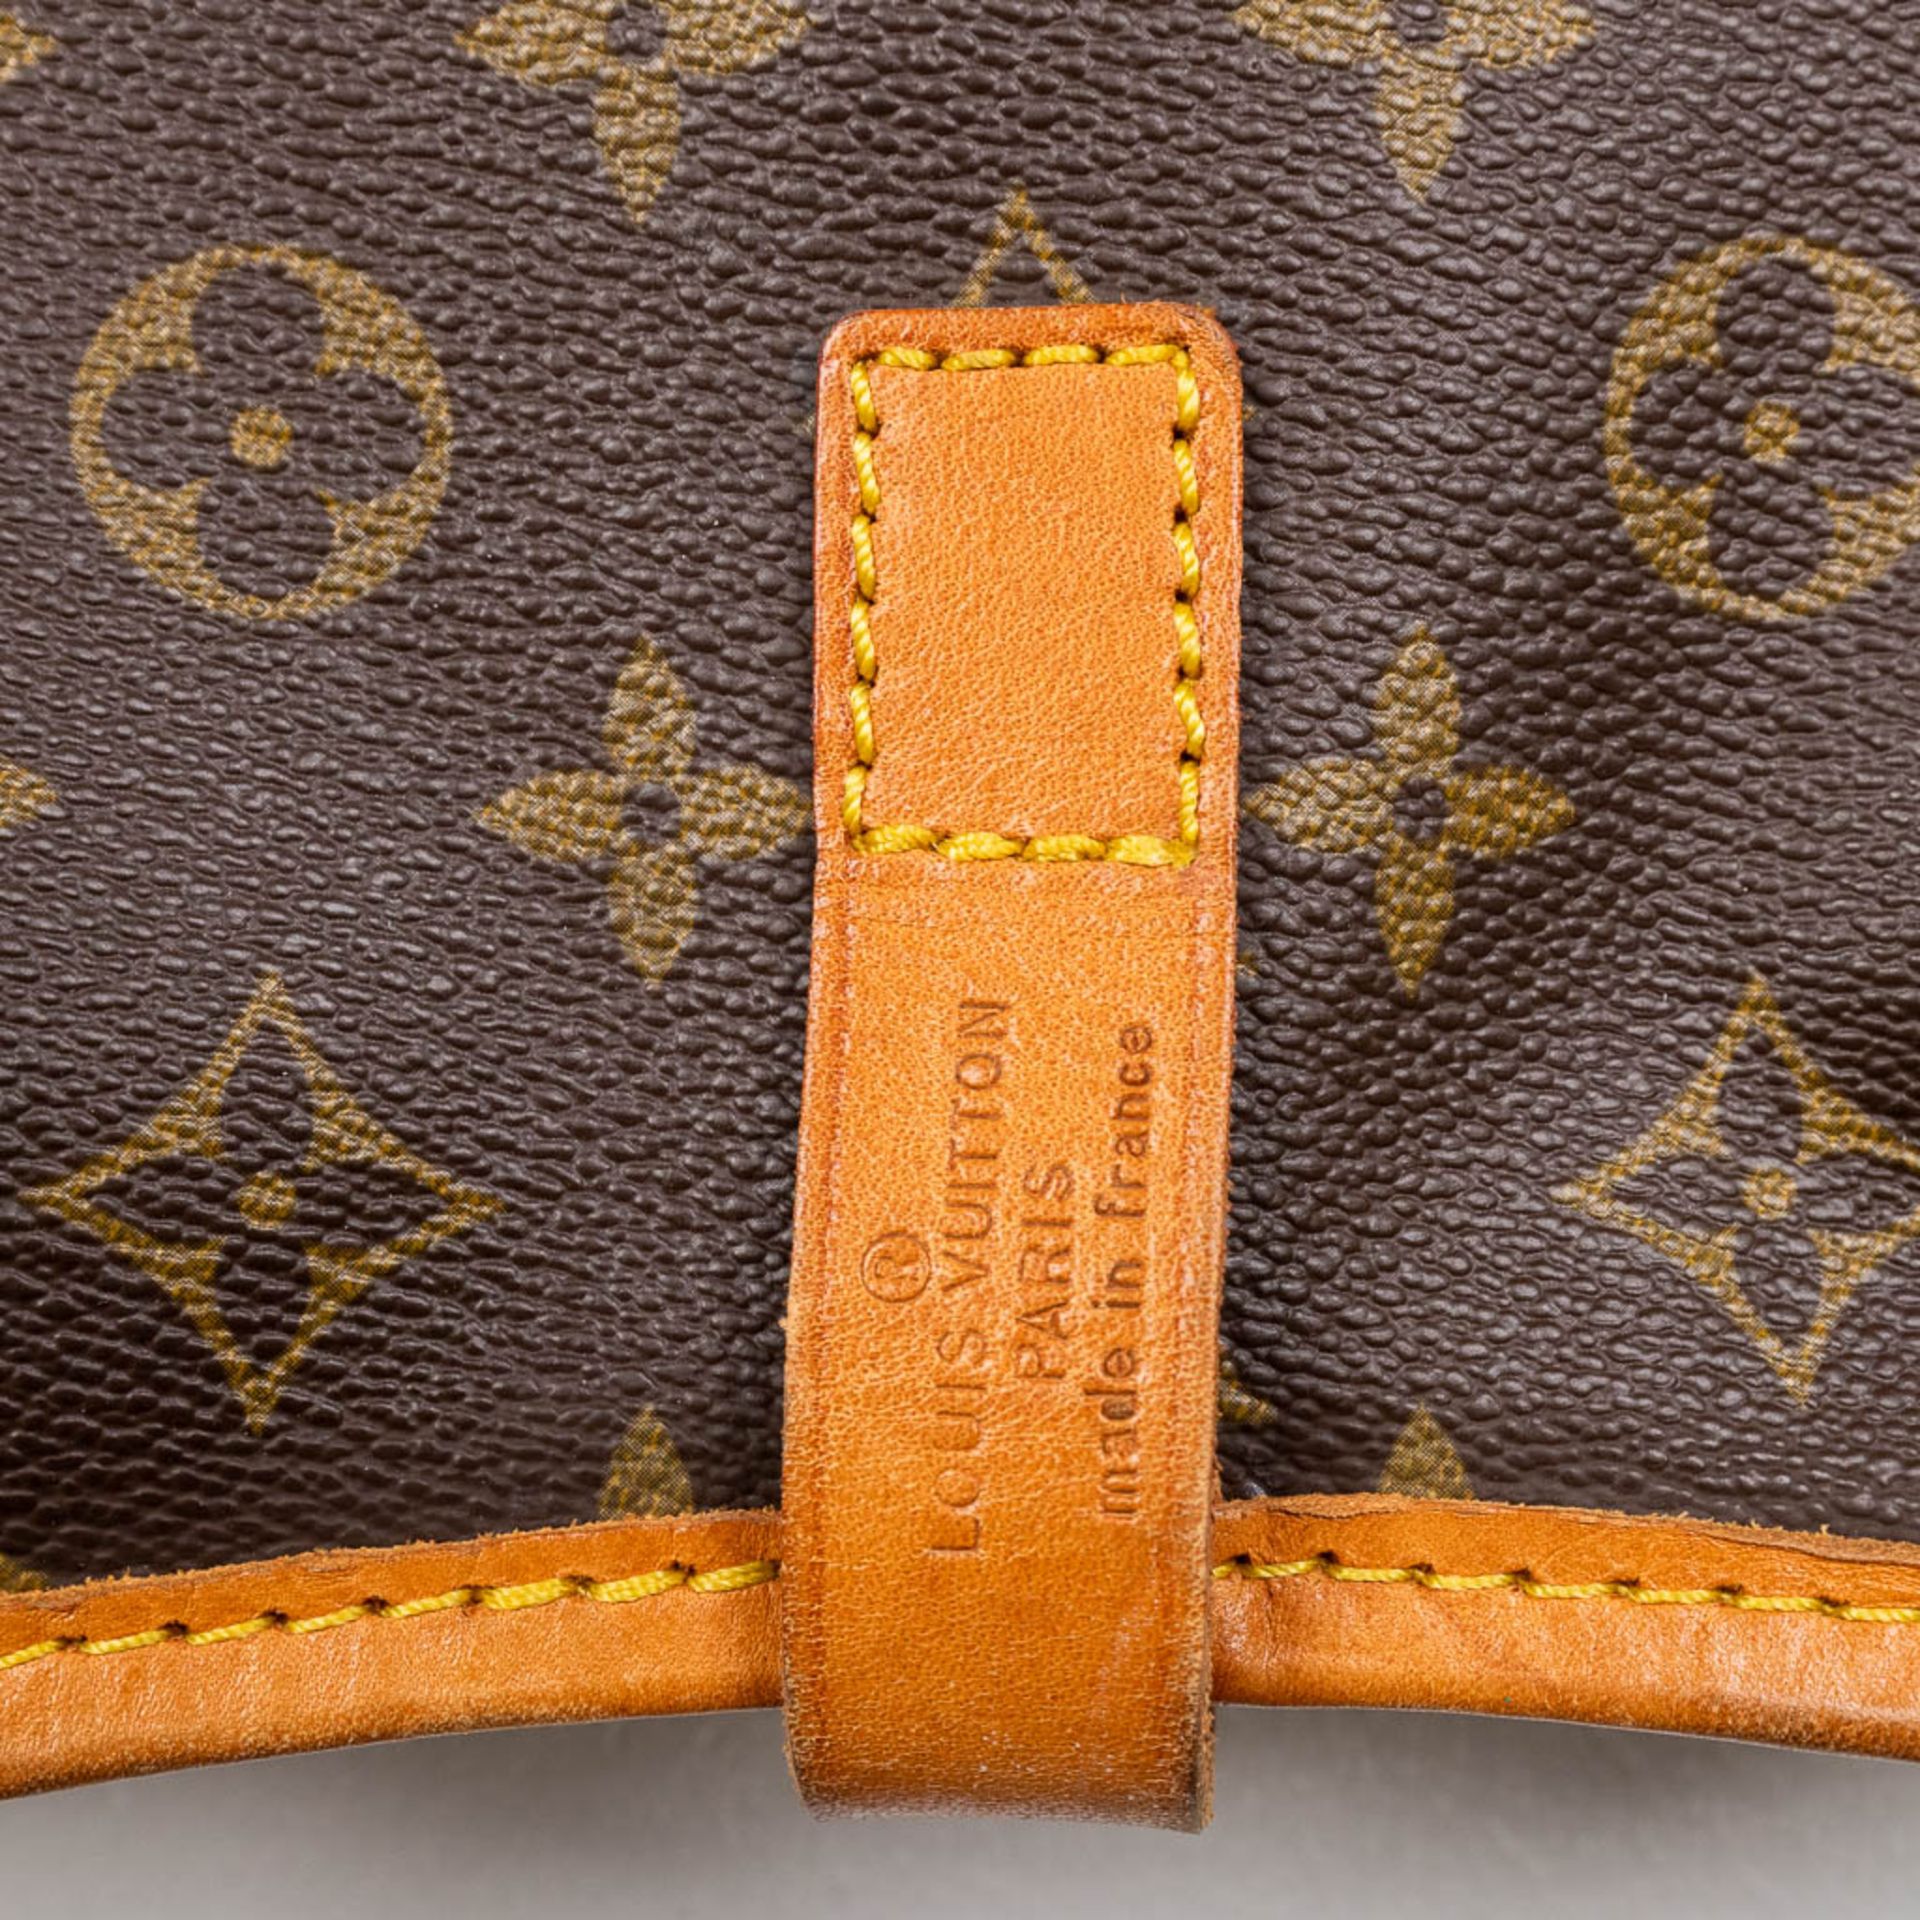 Louis Vuitton, a vintage costume storage bag made of leather. (H:123 cm) - Image 16 of 18